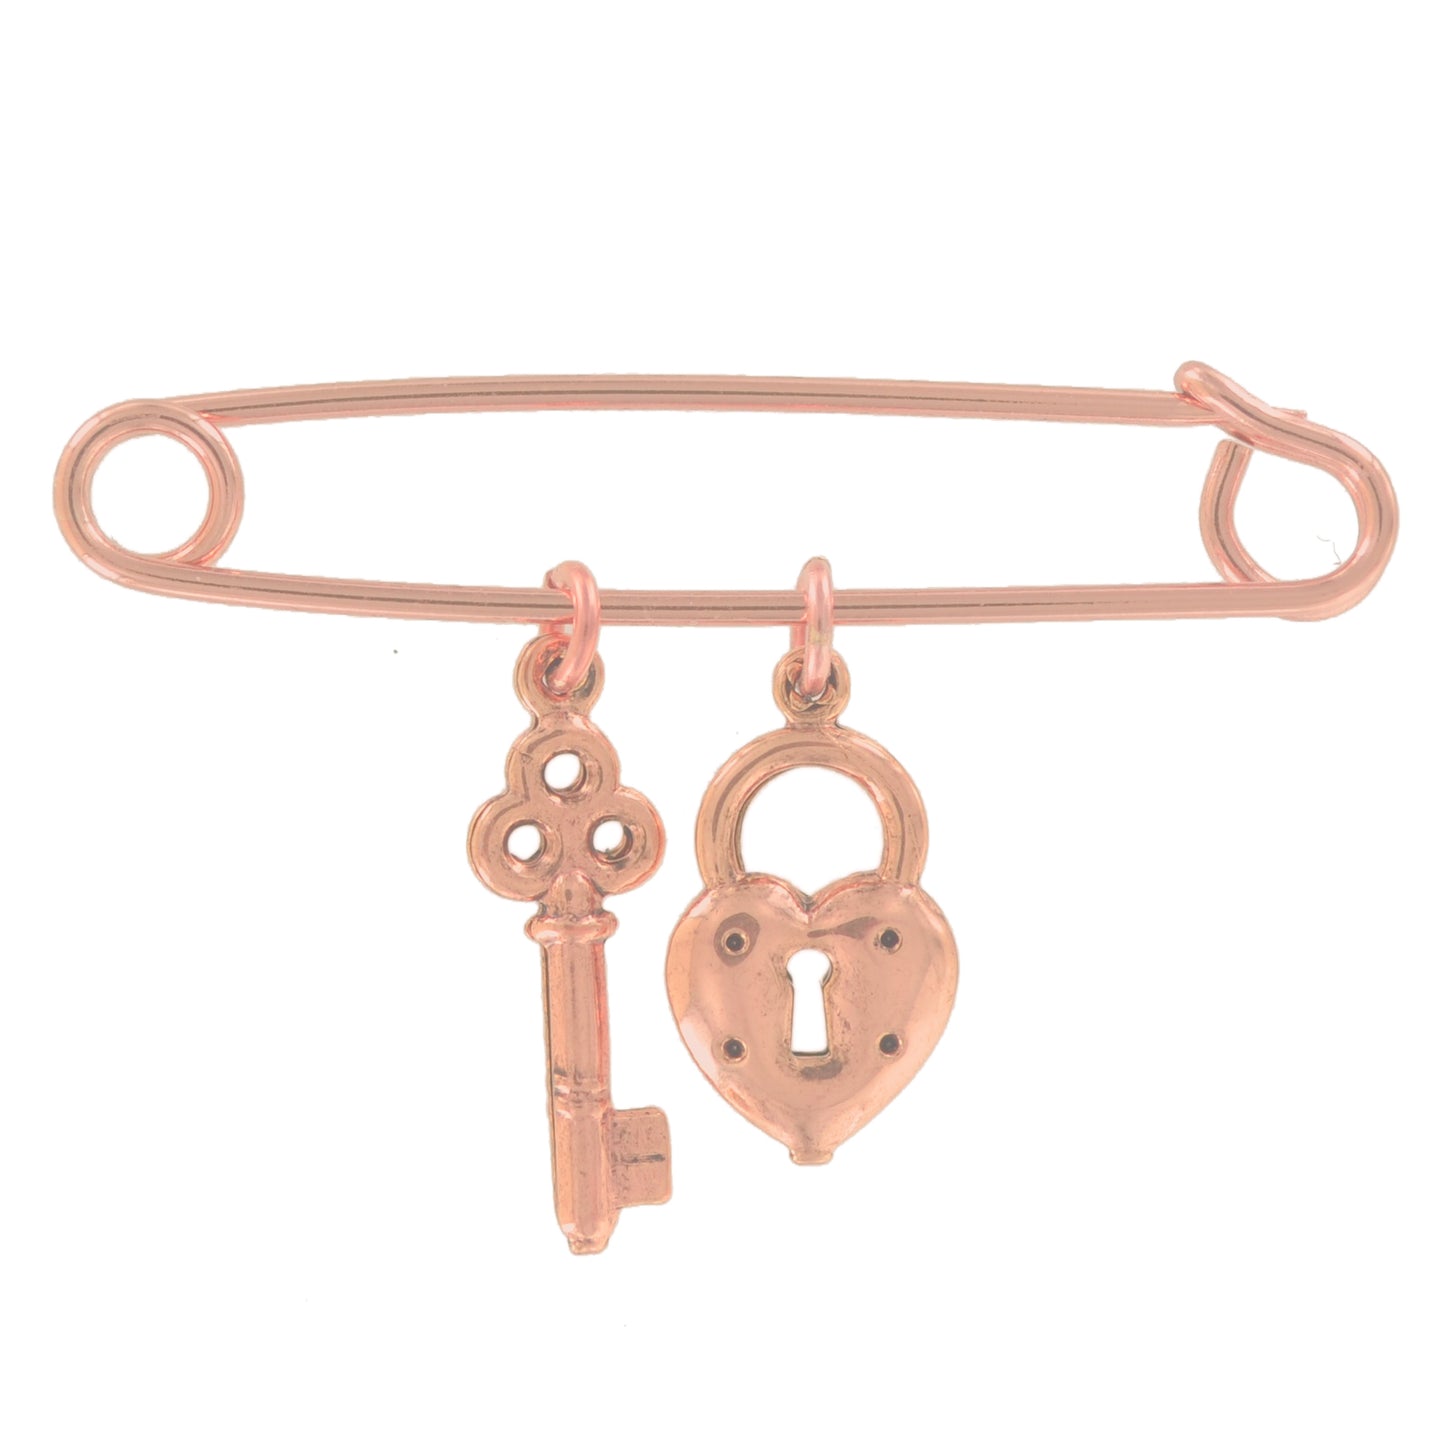 Made in USA Safety Pin Brooch Heart Key Charm Rose Gold Tone  2"